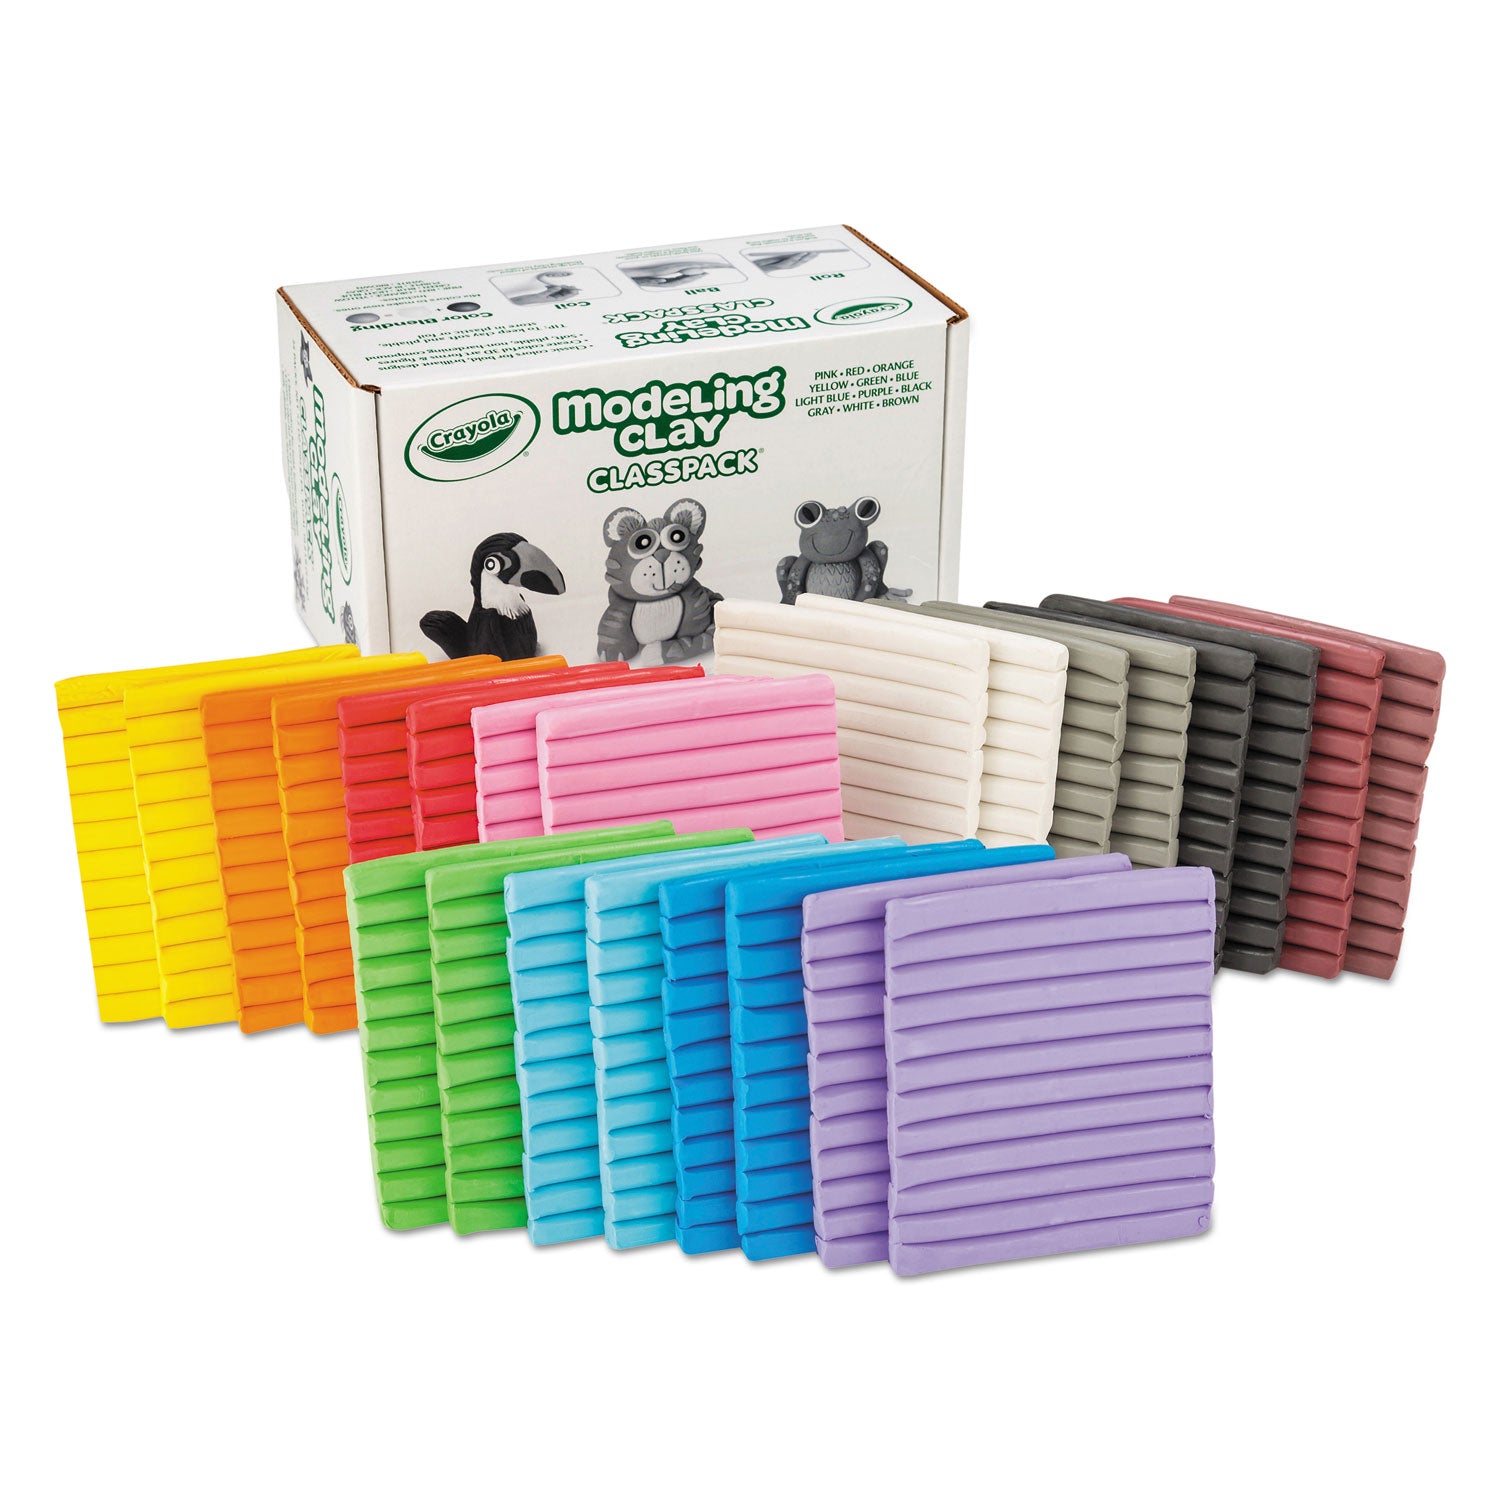 modeling-clay-classpack-assorted-colors-24-lbs_cyo230288 - 2